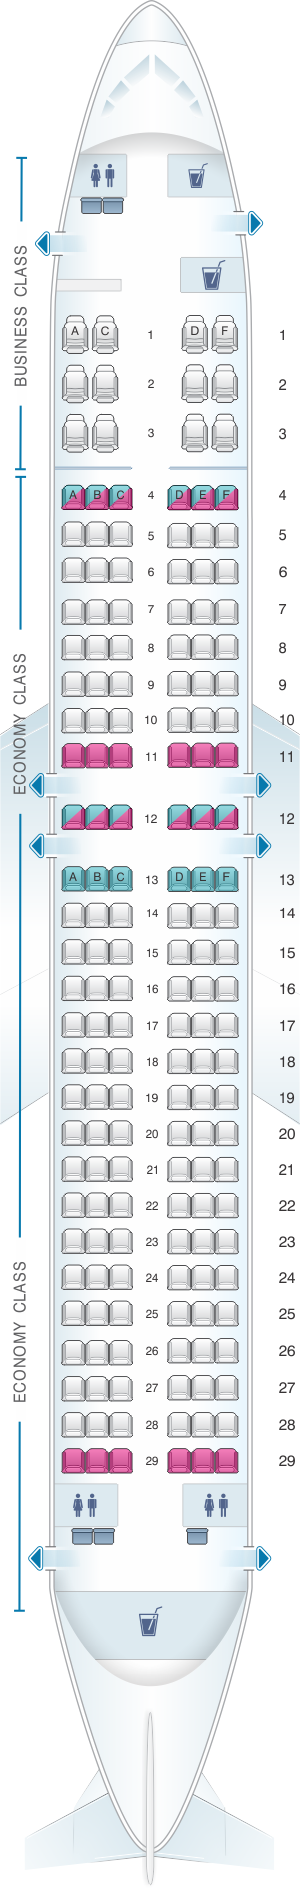 Seat map for Rossiya Airlines Boeing B737 800 168PAX V2